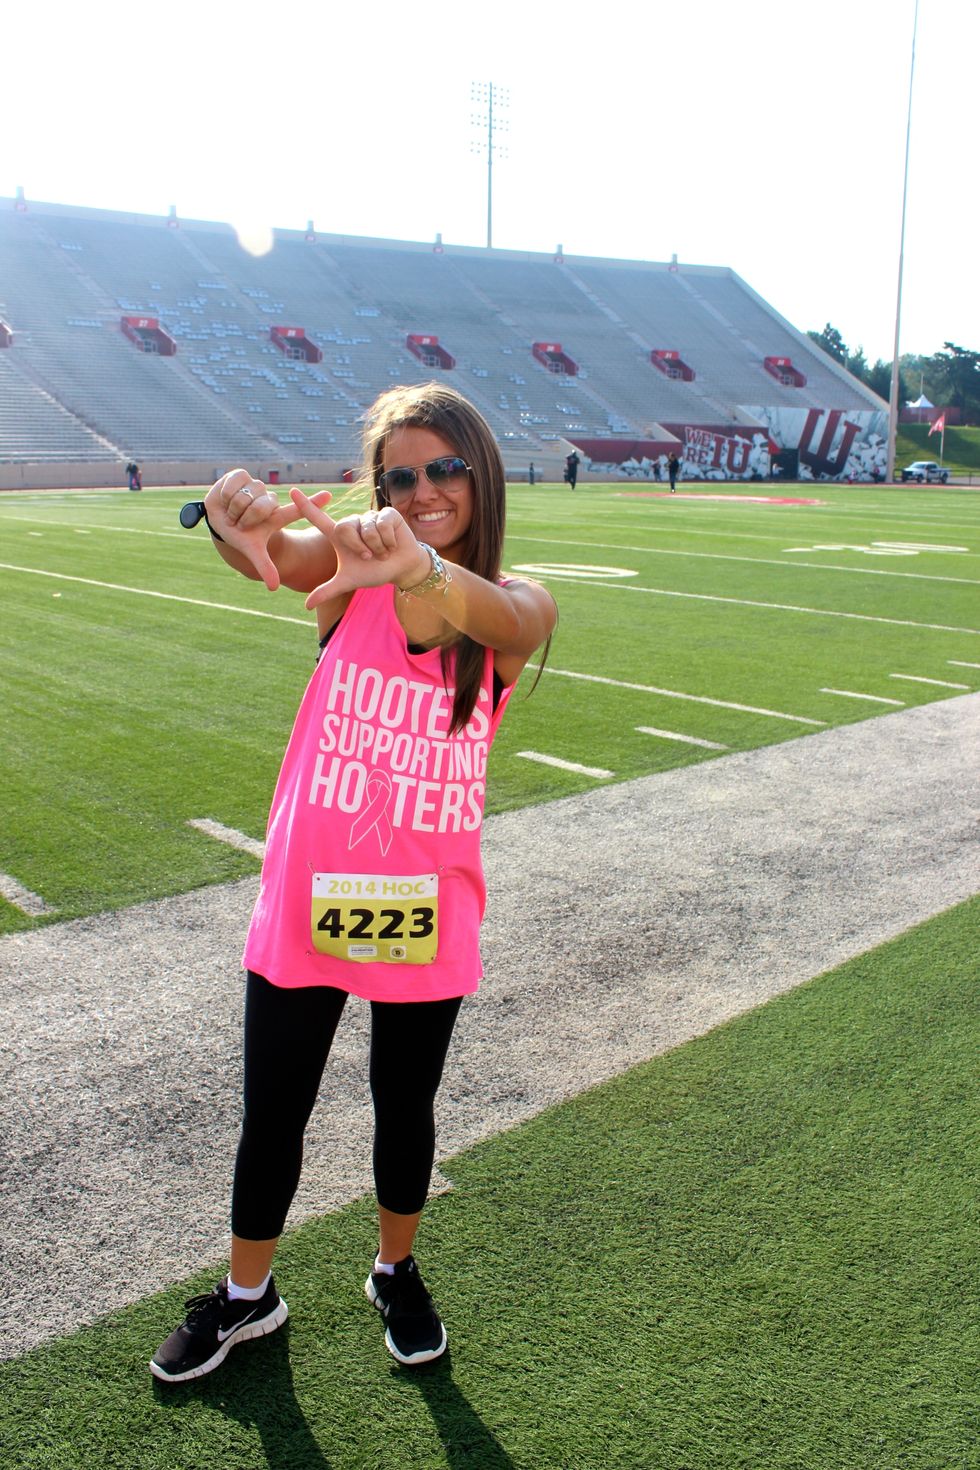 Hoosiers Outrun Cancer